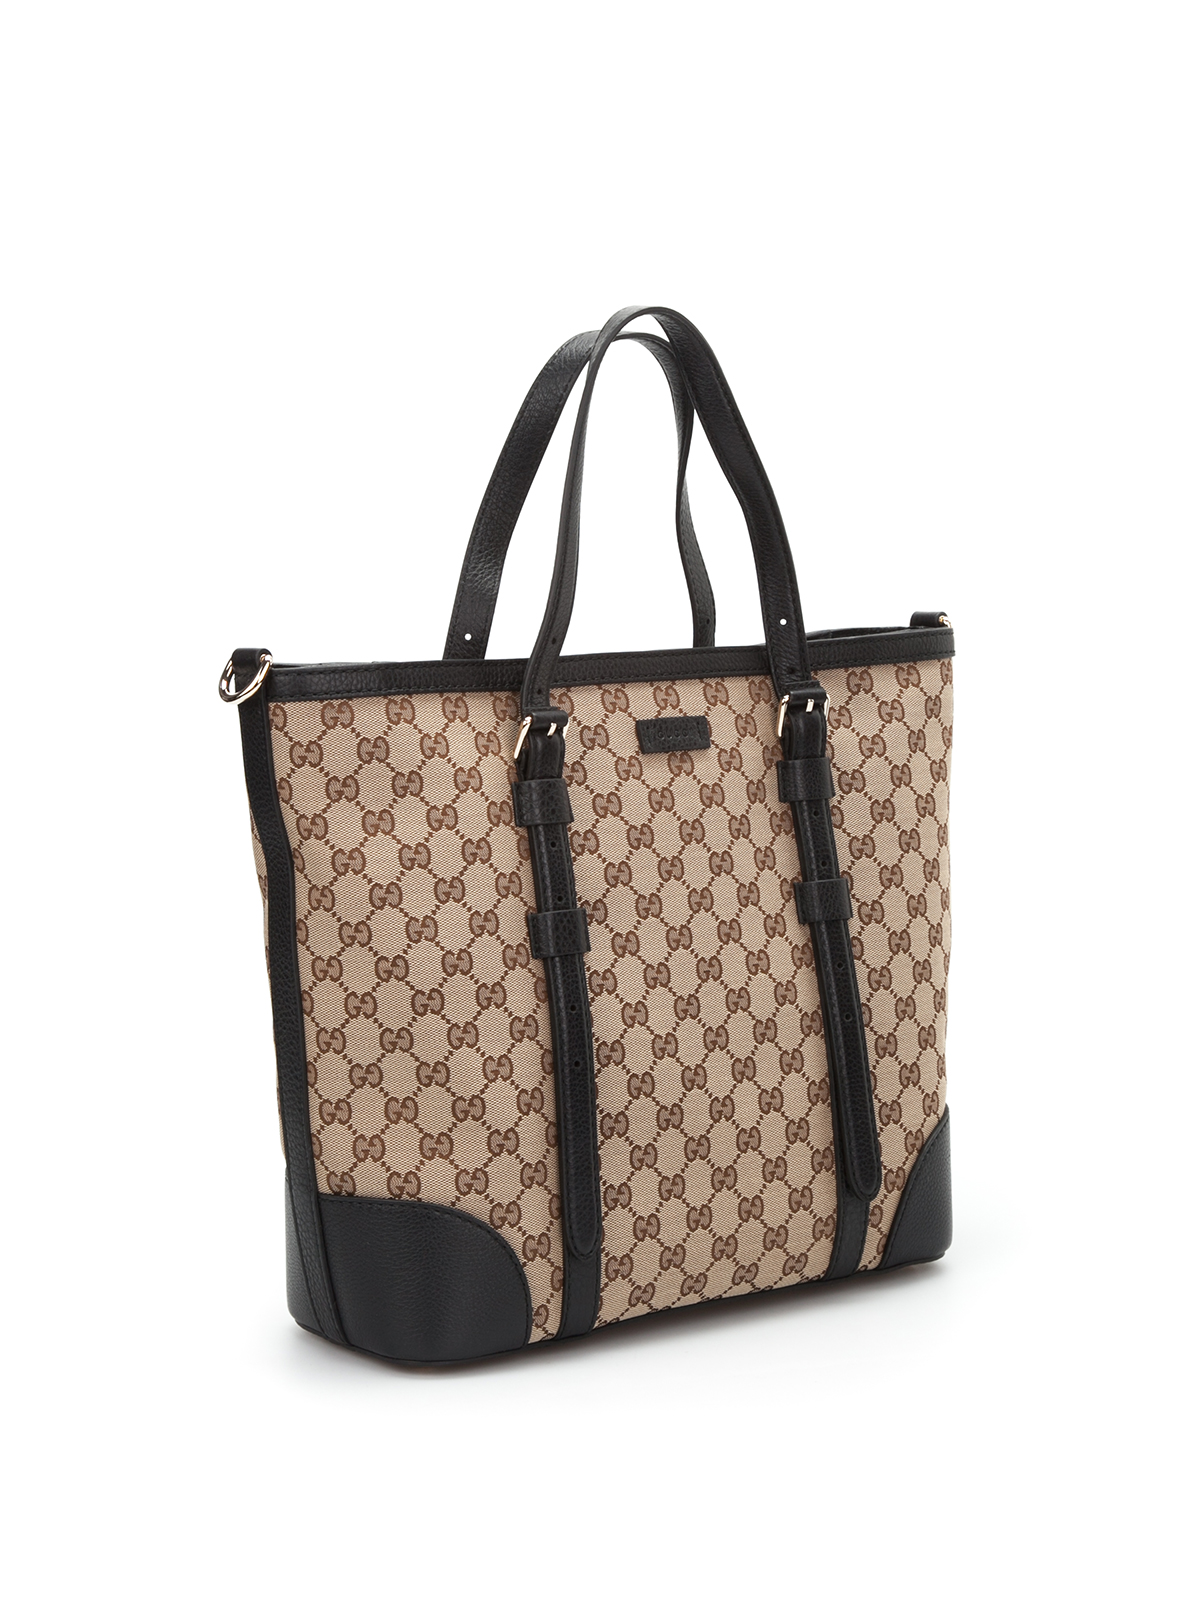 GG classic tote by Gucci - totes bags | Shop online at literacybasics.ca - 387602 KQW1G 9769